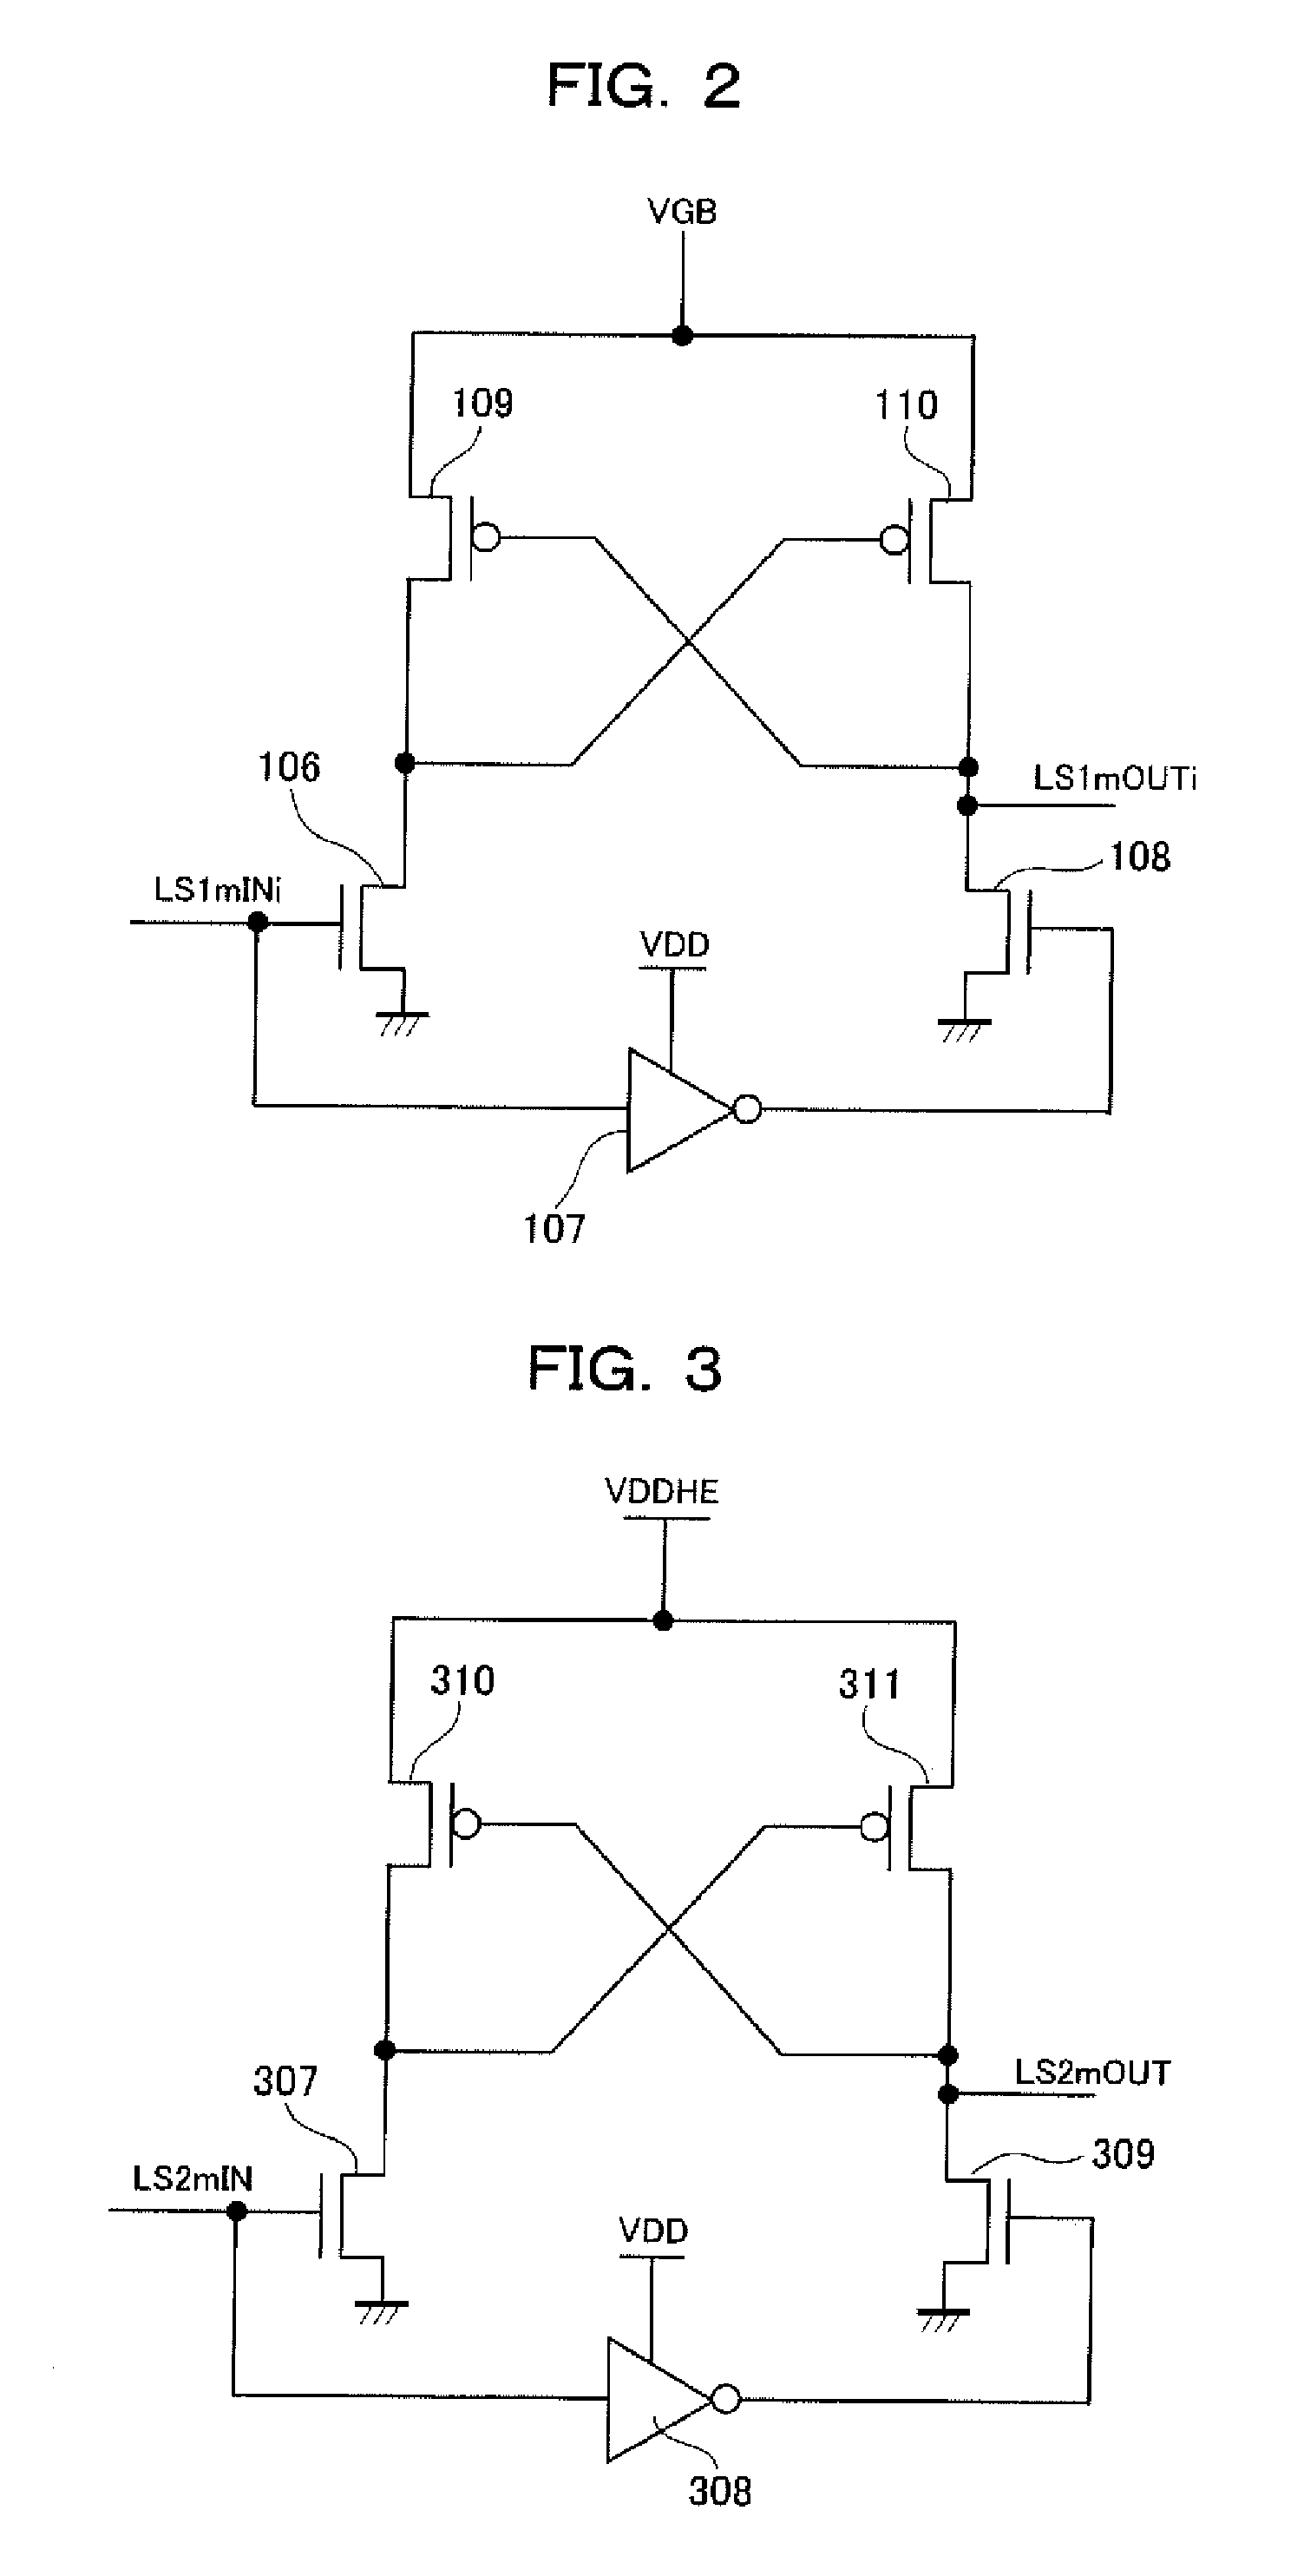 Electric fuse circuit available as one time programable memory